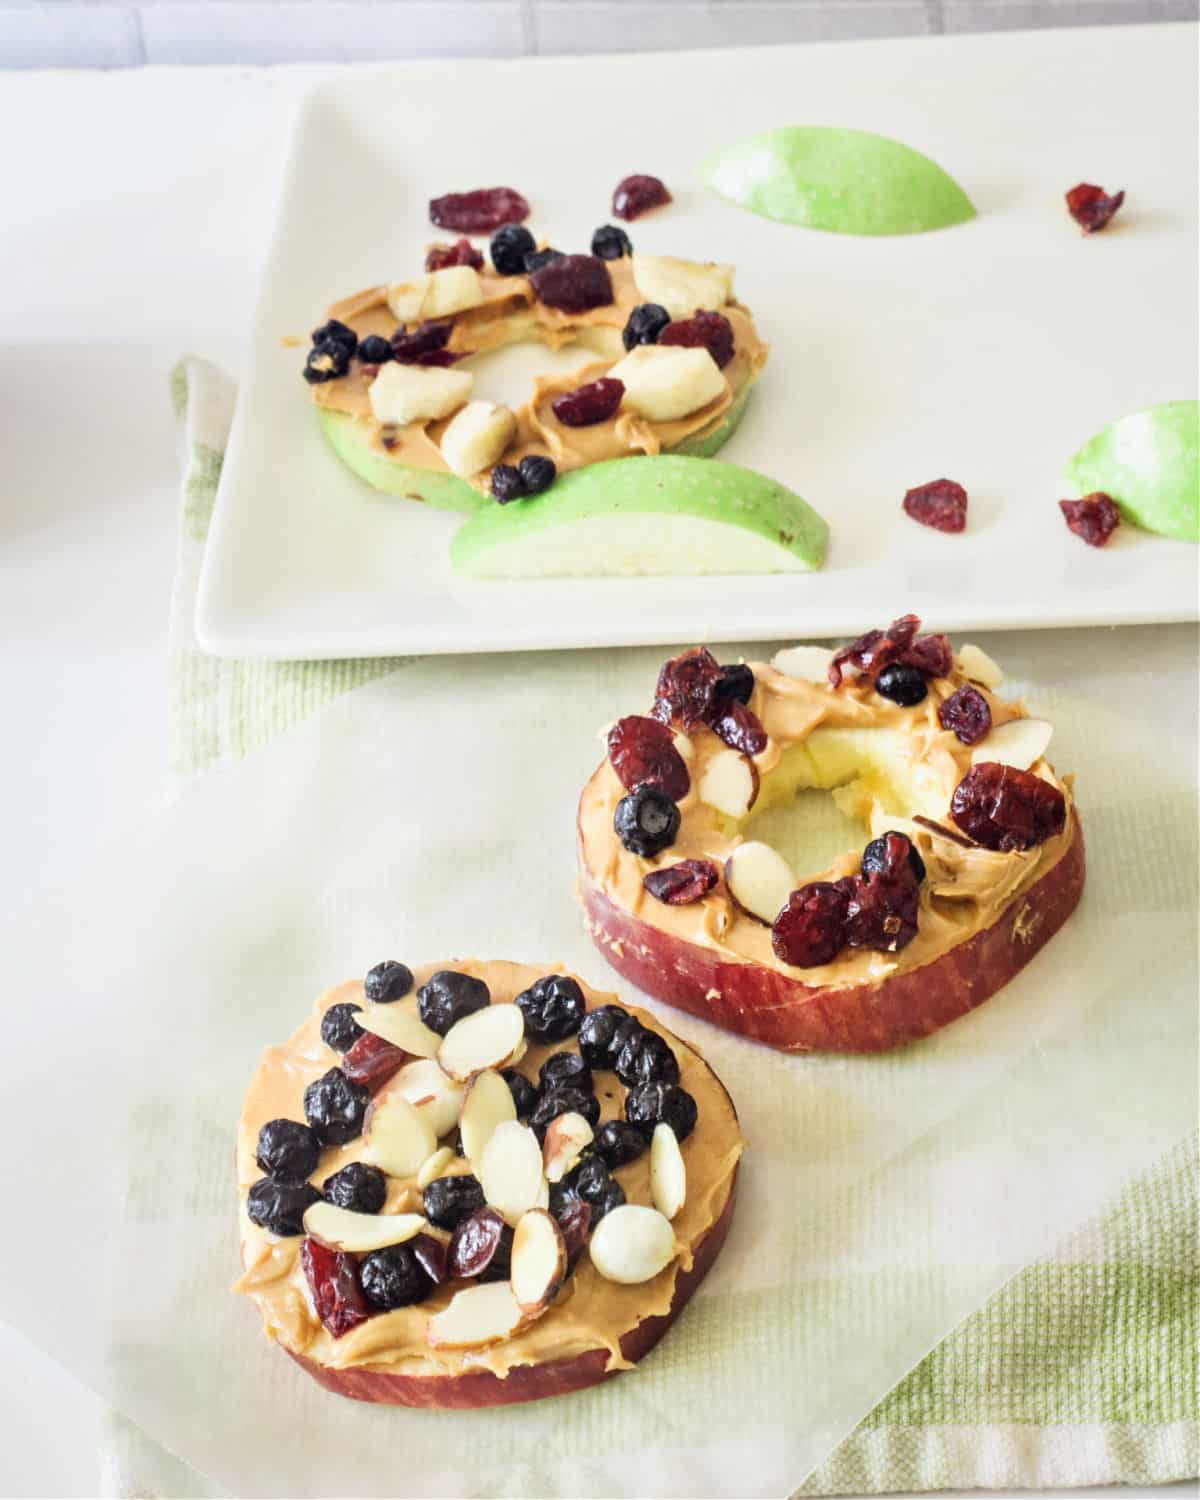 Sliced apples topped with peanut butter, raisins, blueberries, and dried fruit.